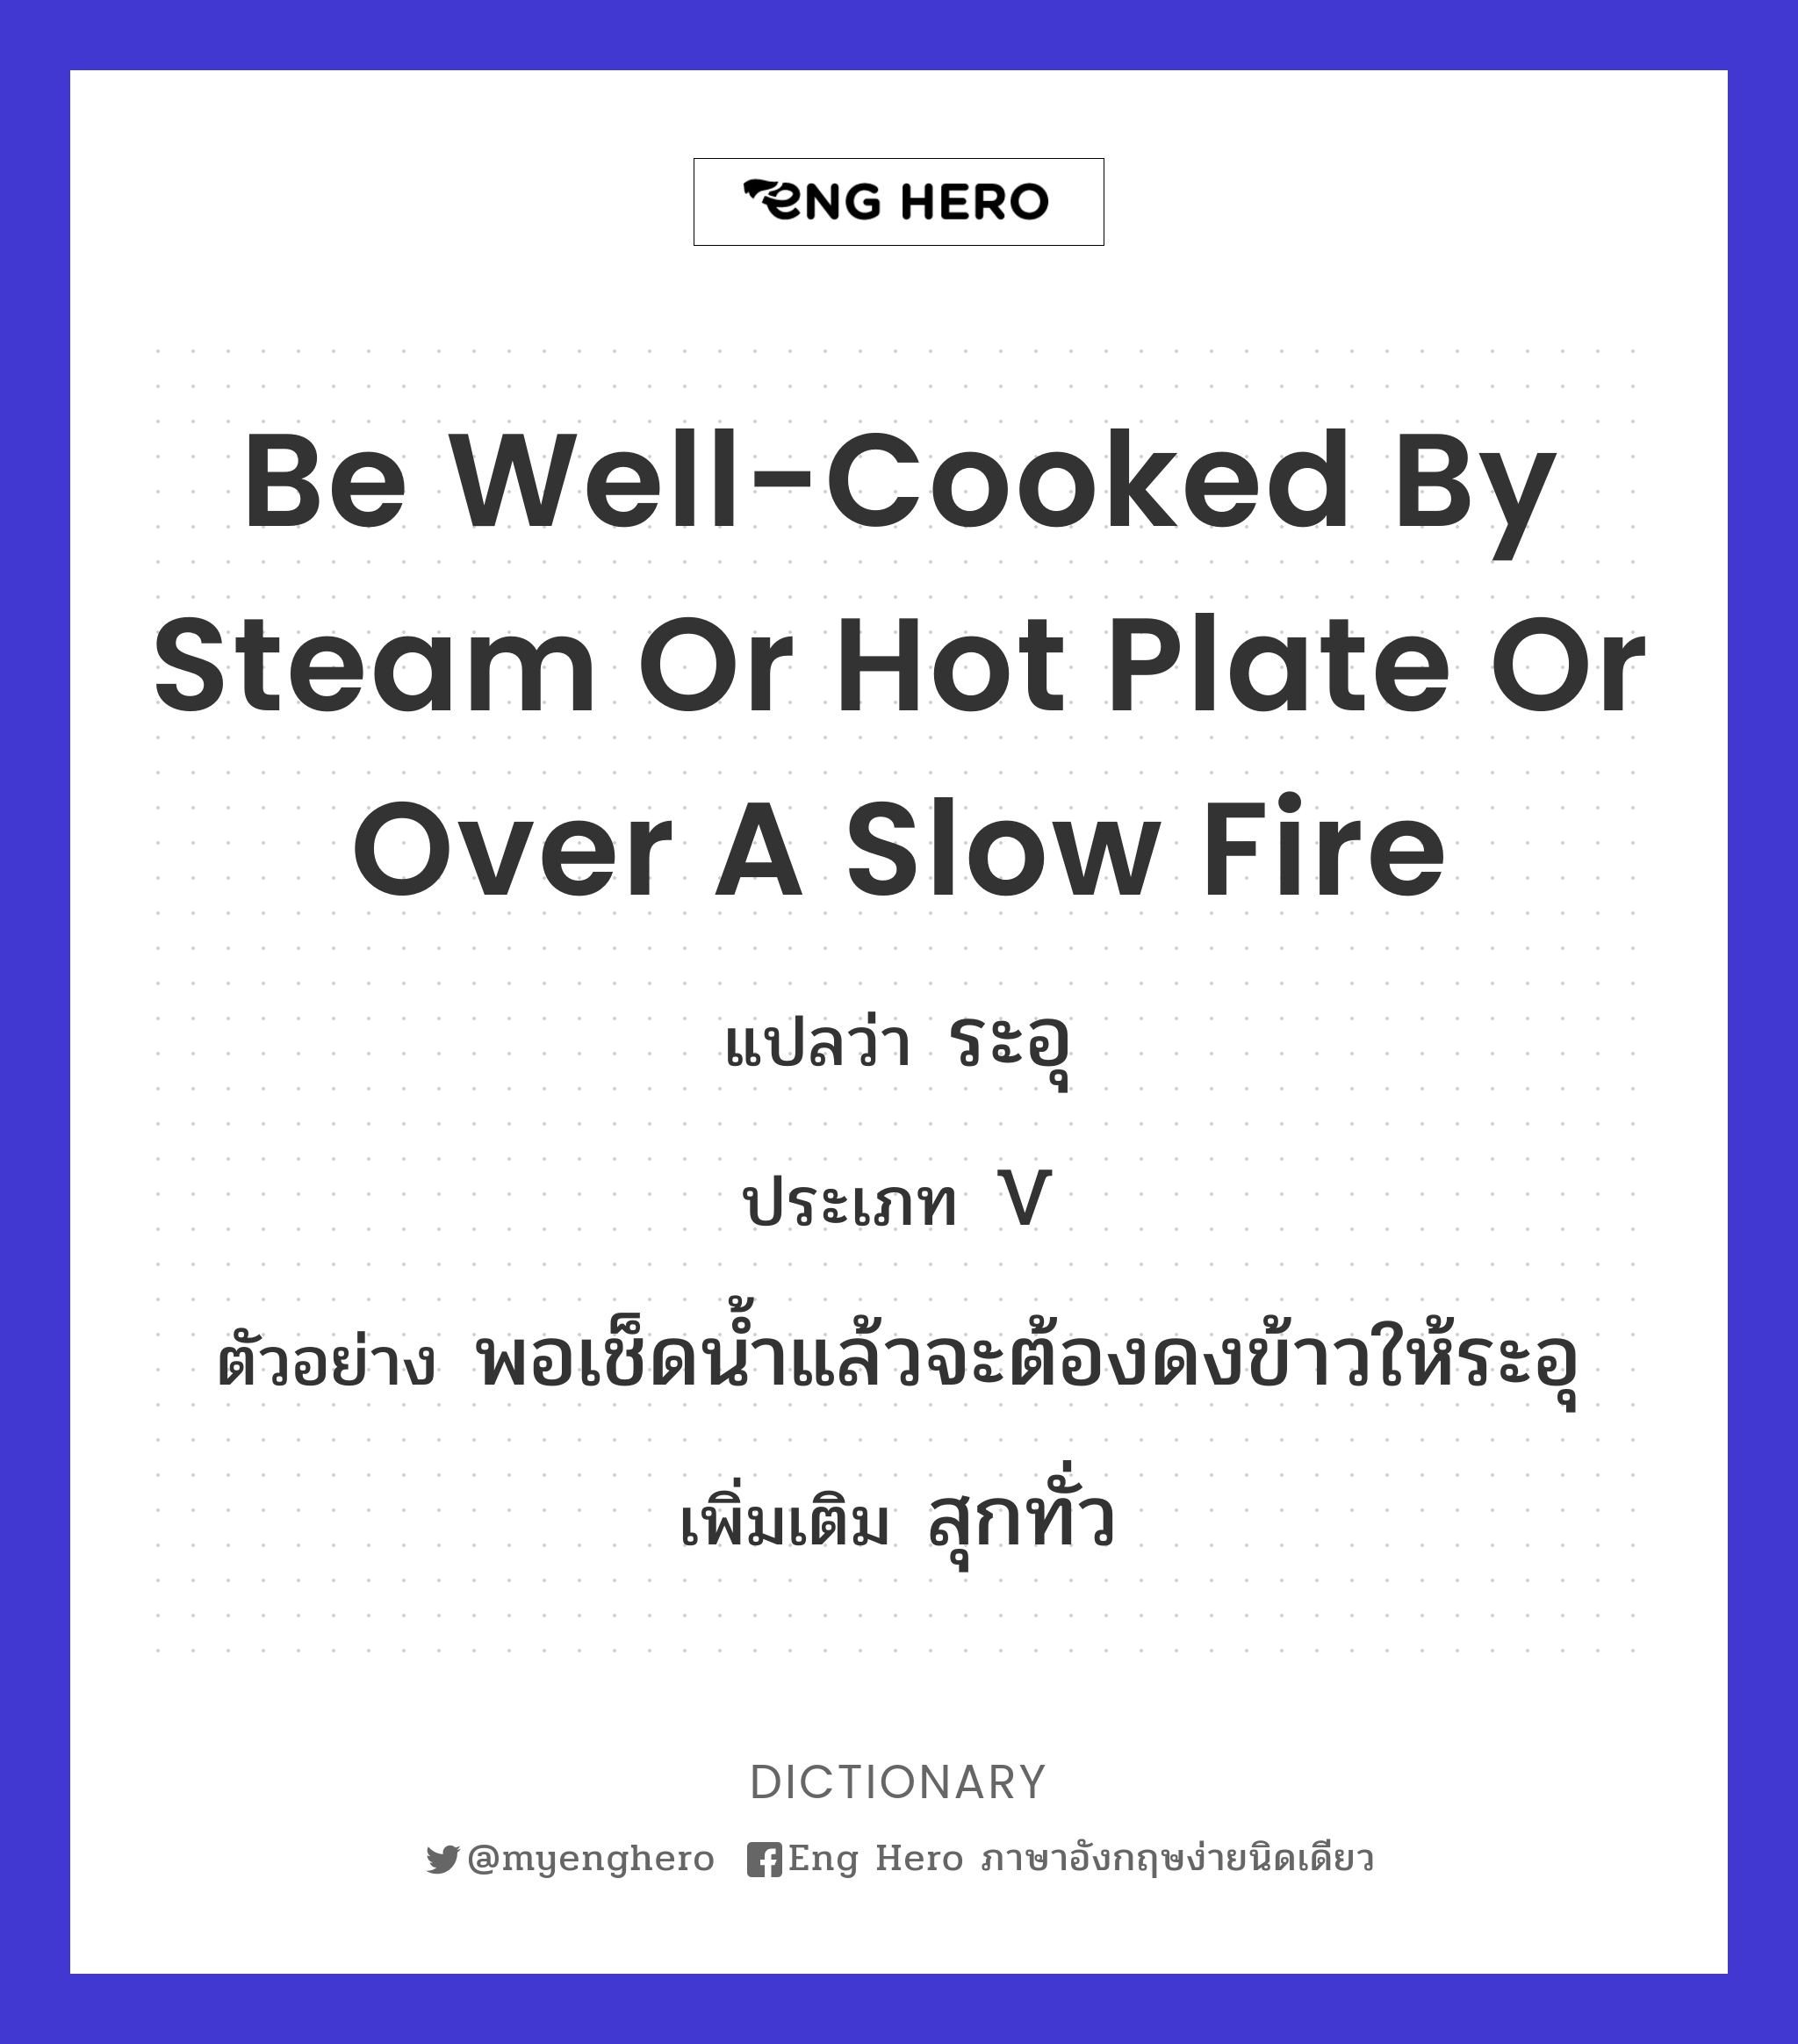 be well-cooked by steam or hot plate or over a slow fire